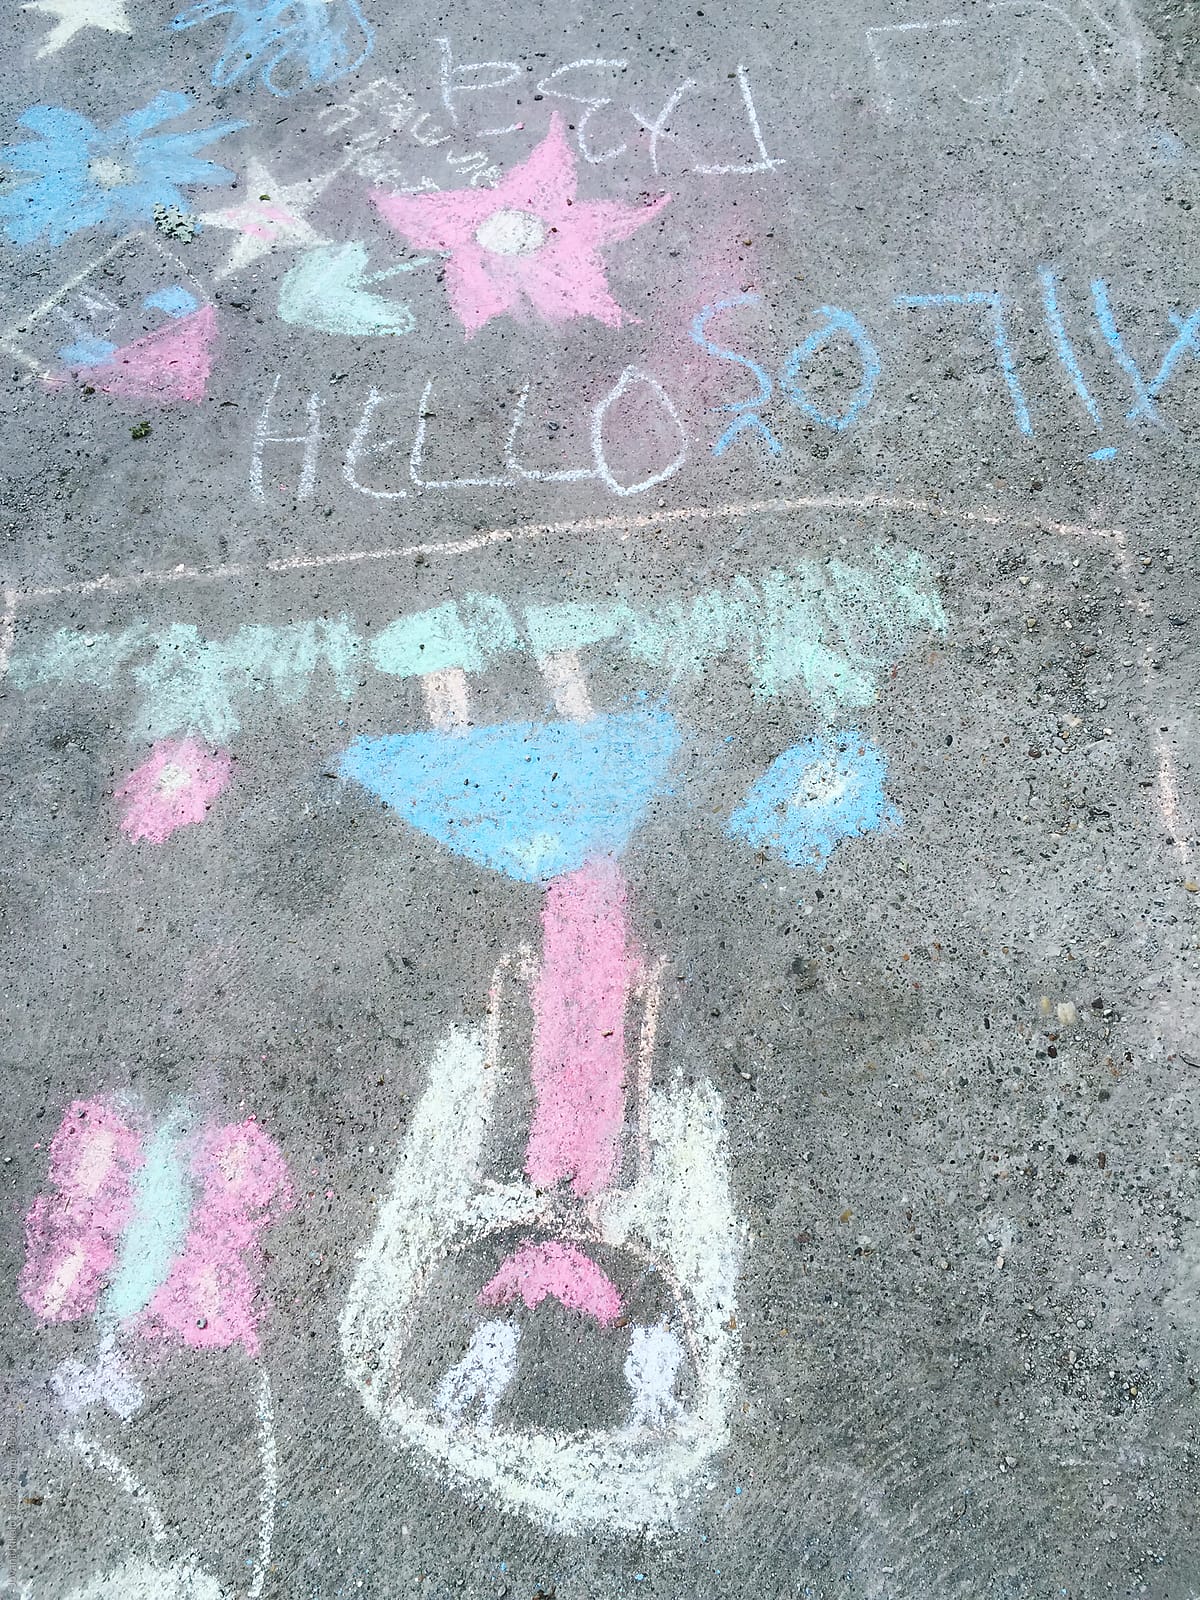 Child's chalk drawing on the street